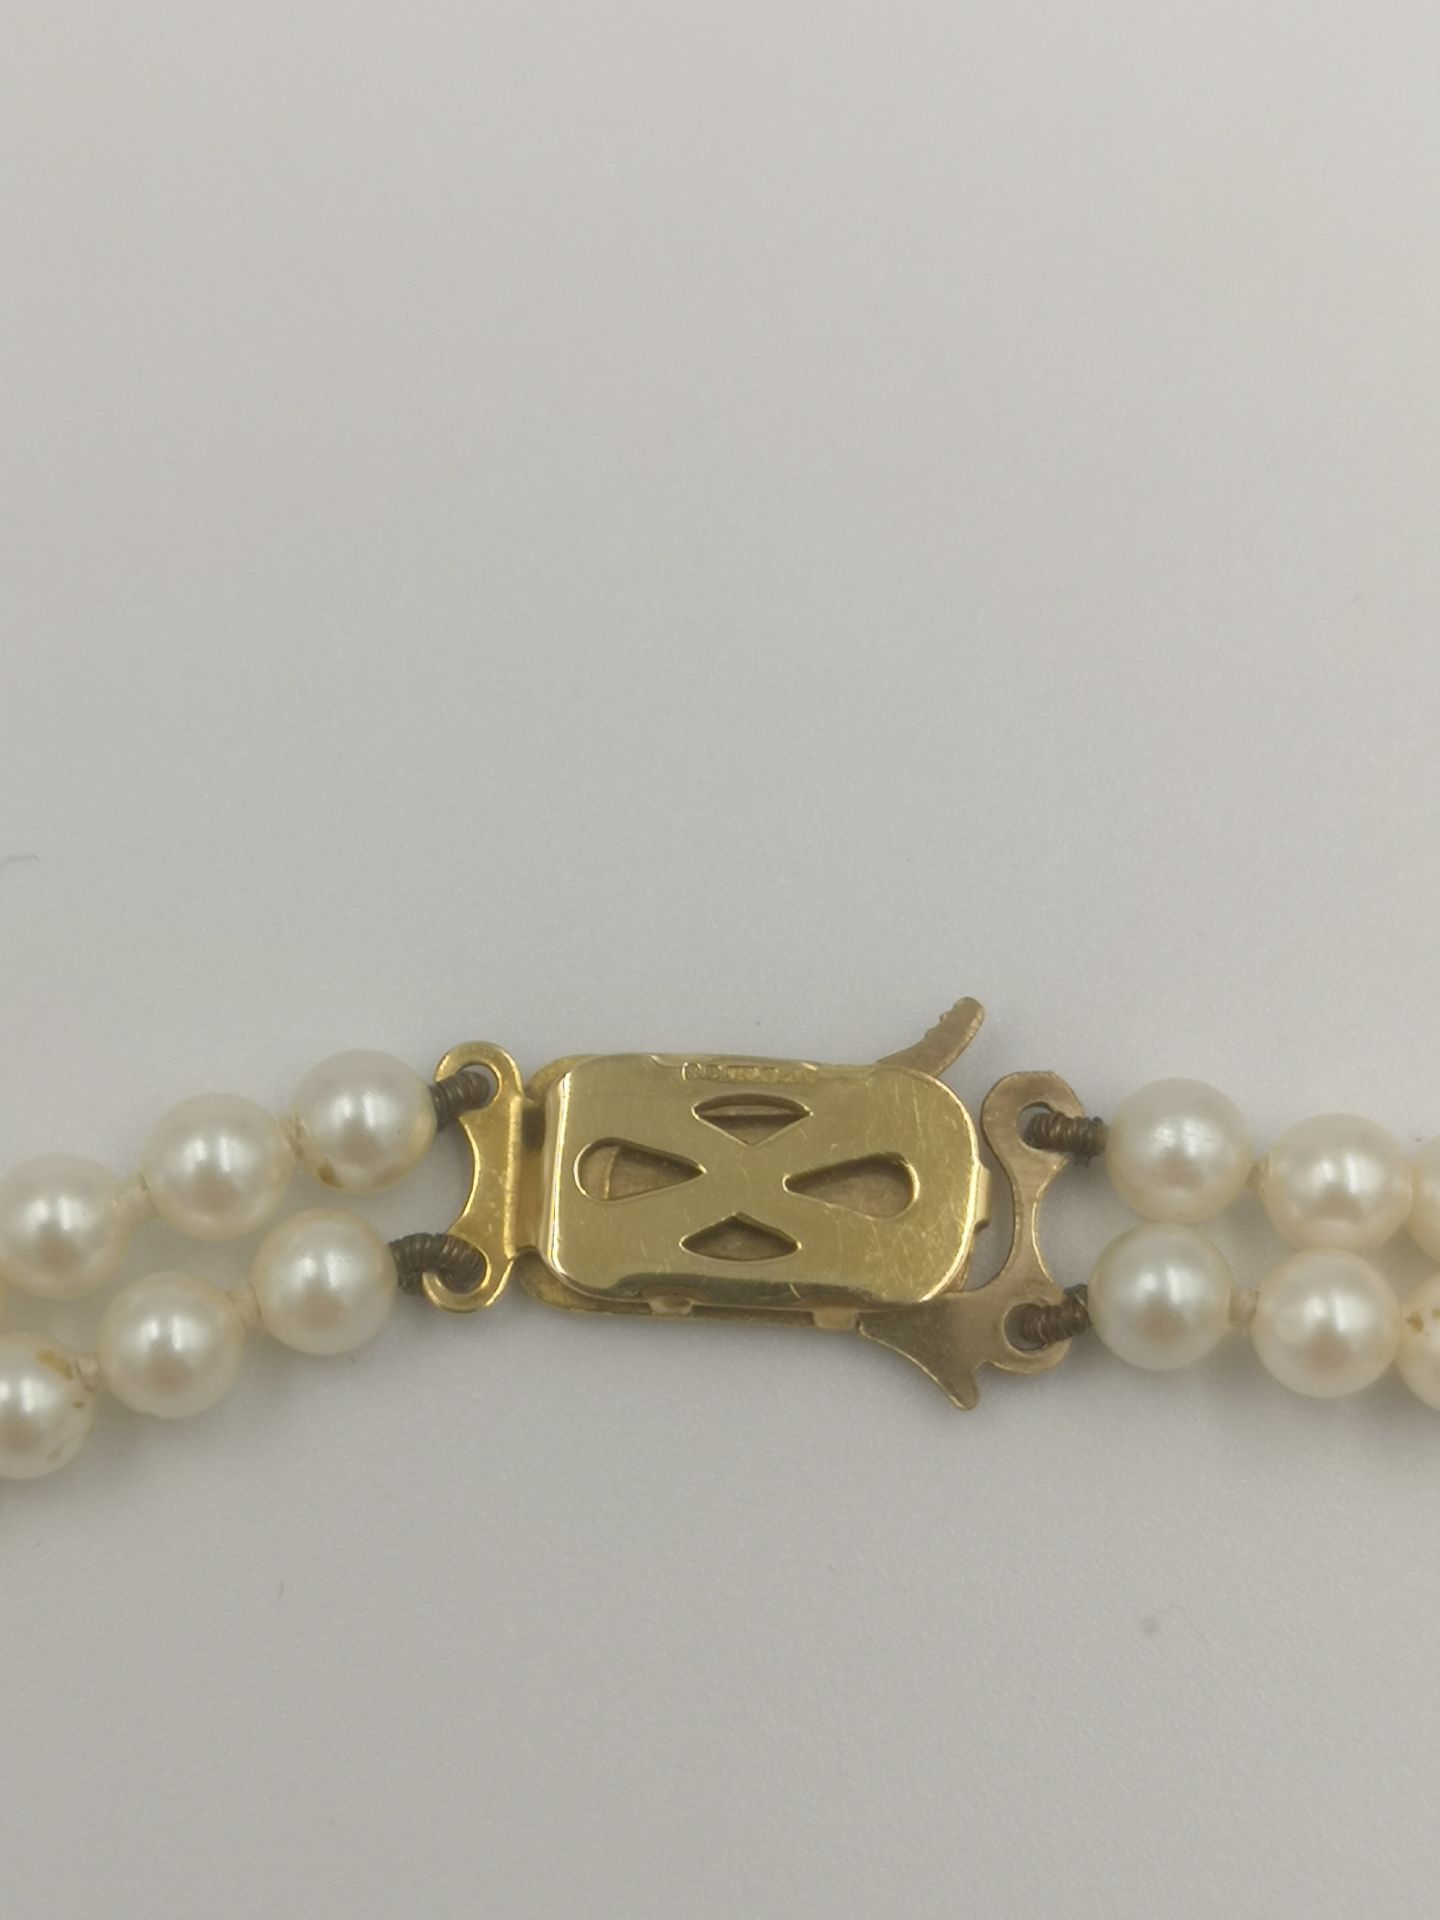 Pearl choker with 9ct gold clasp - Image 2 of 4